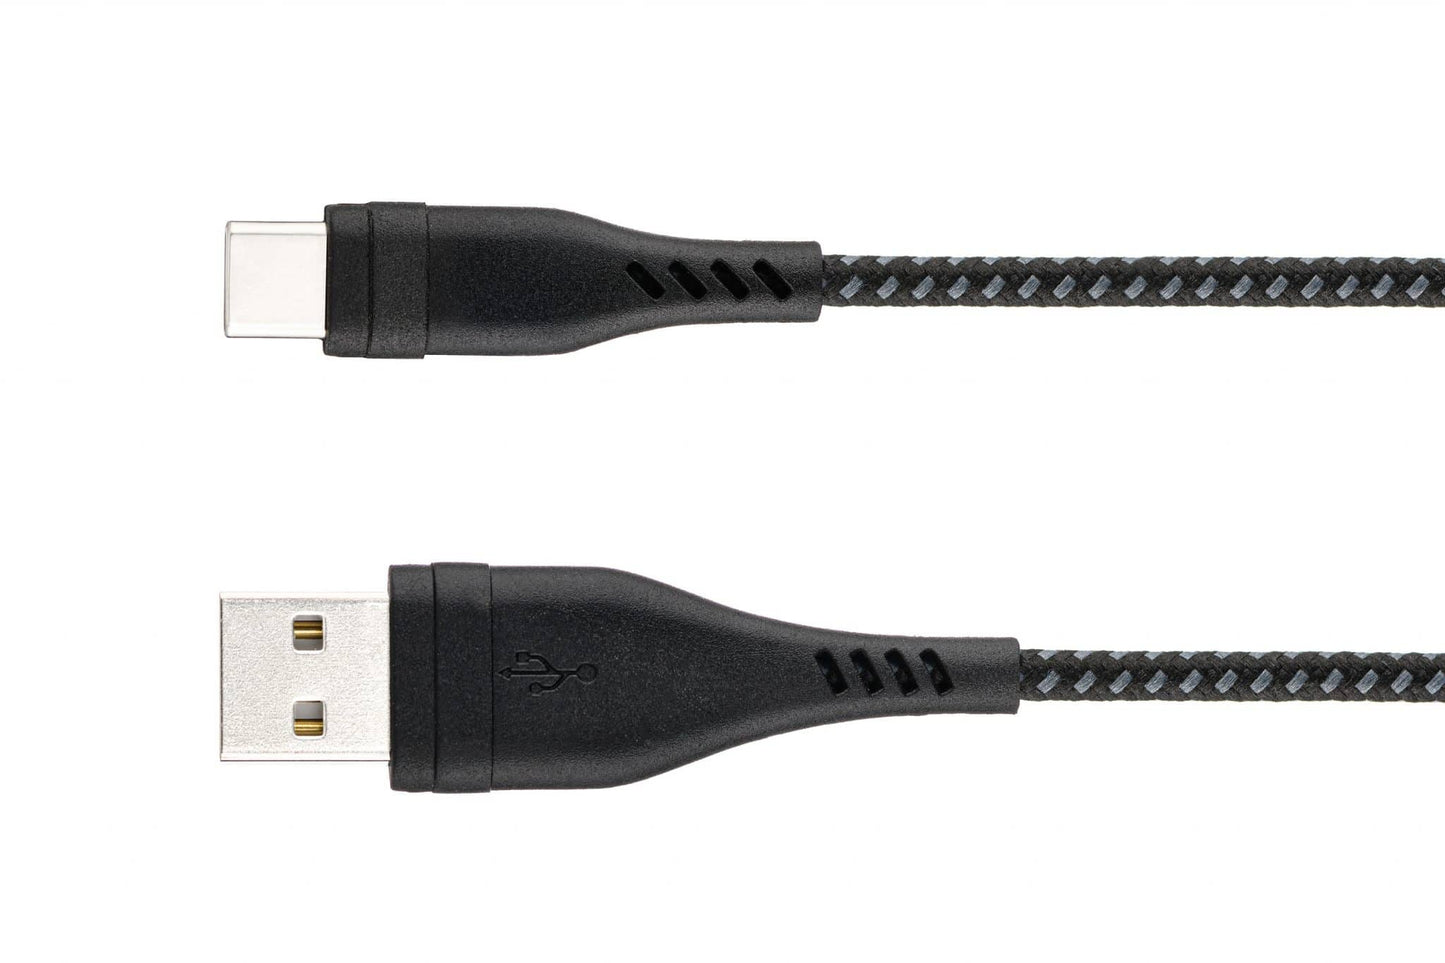 5x MOJOGEAR USB-C to USB cable Extra strong [5-PACK]